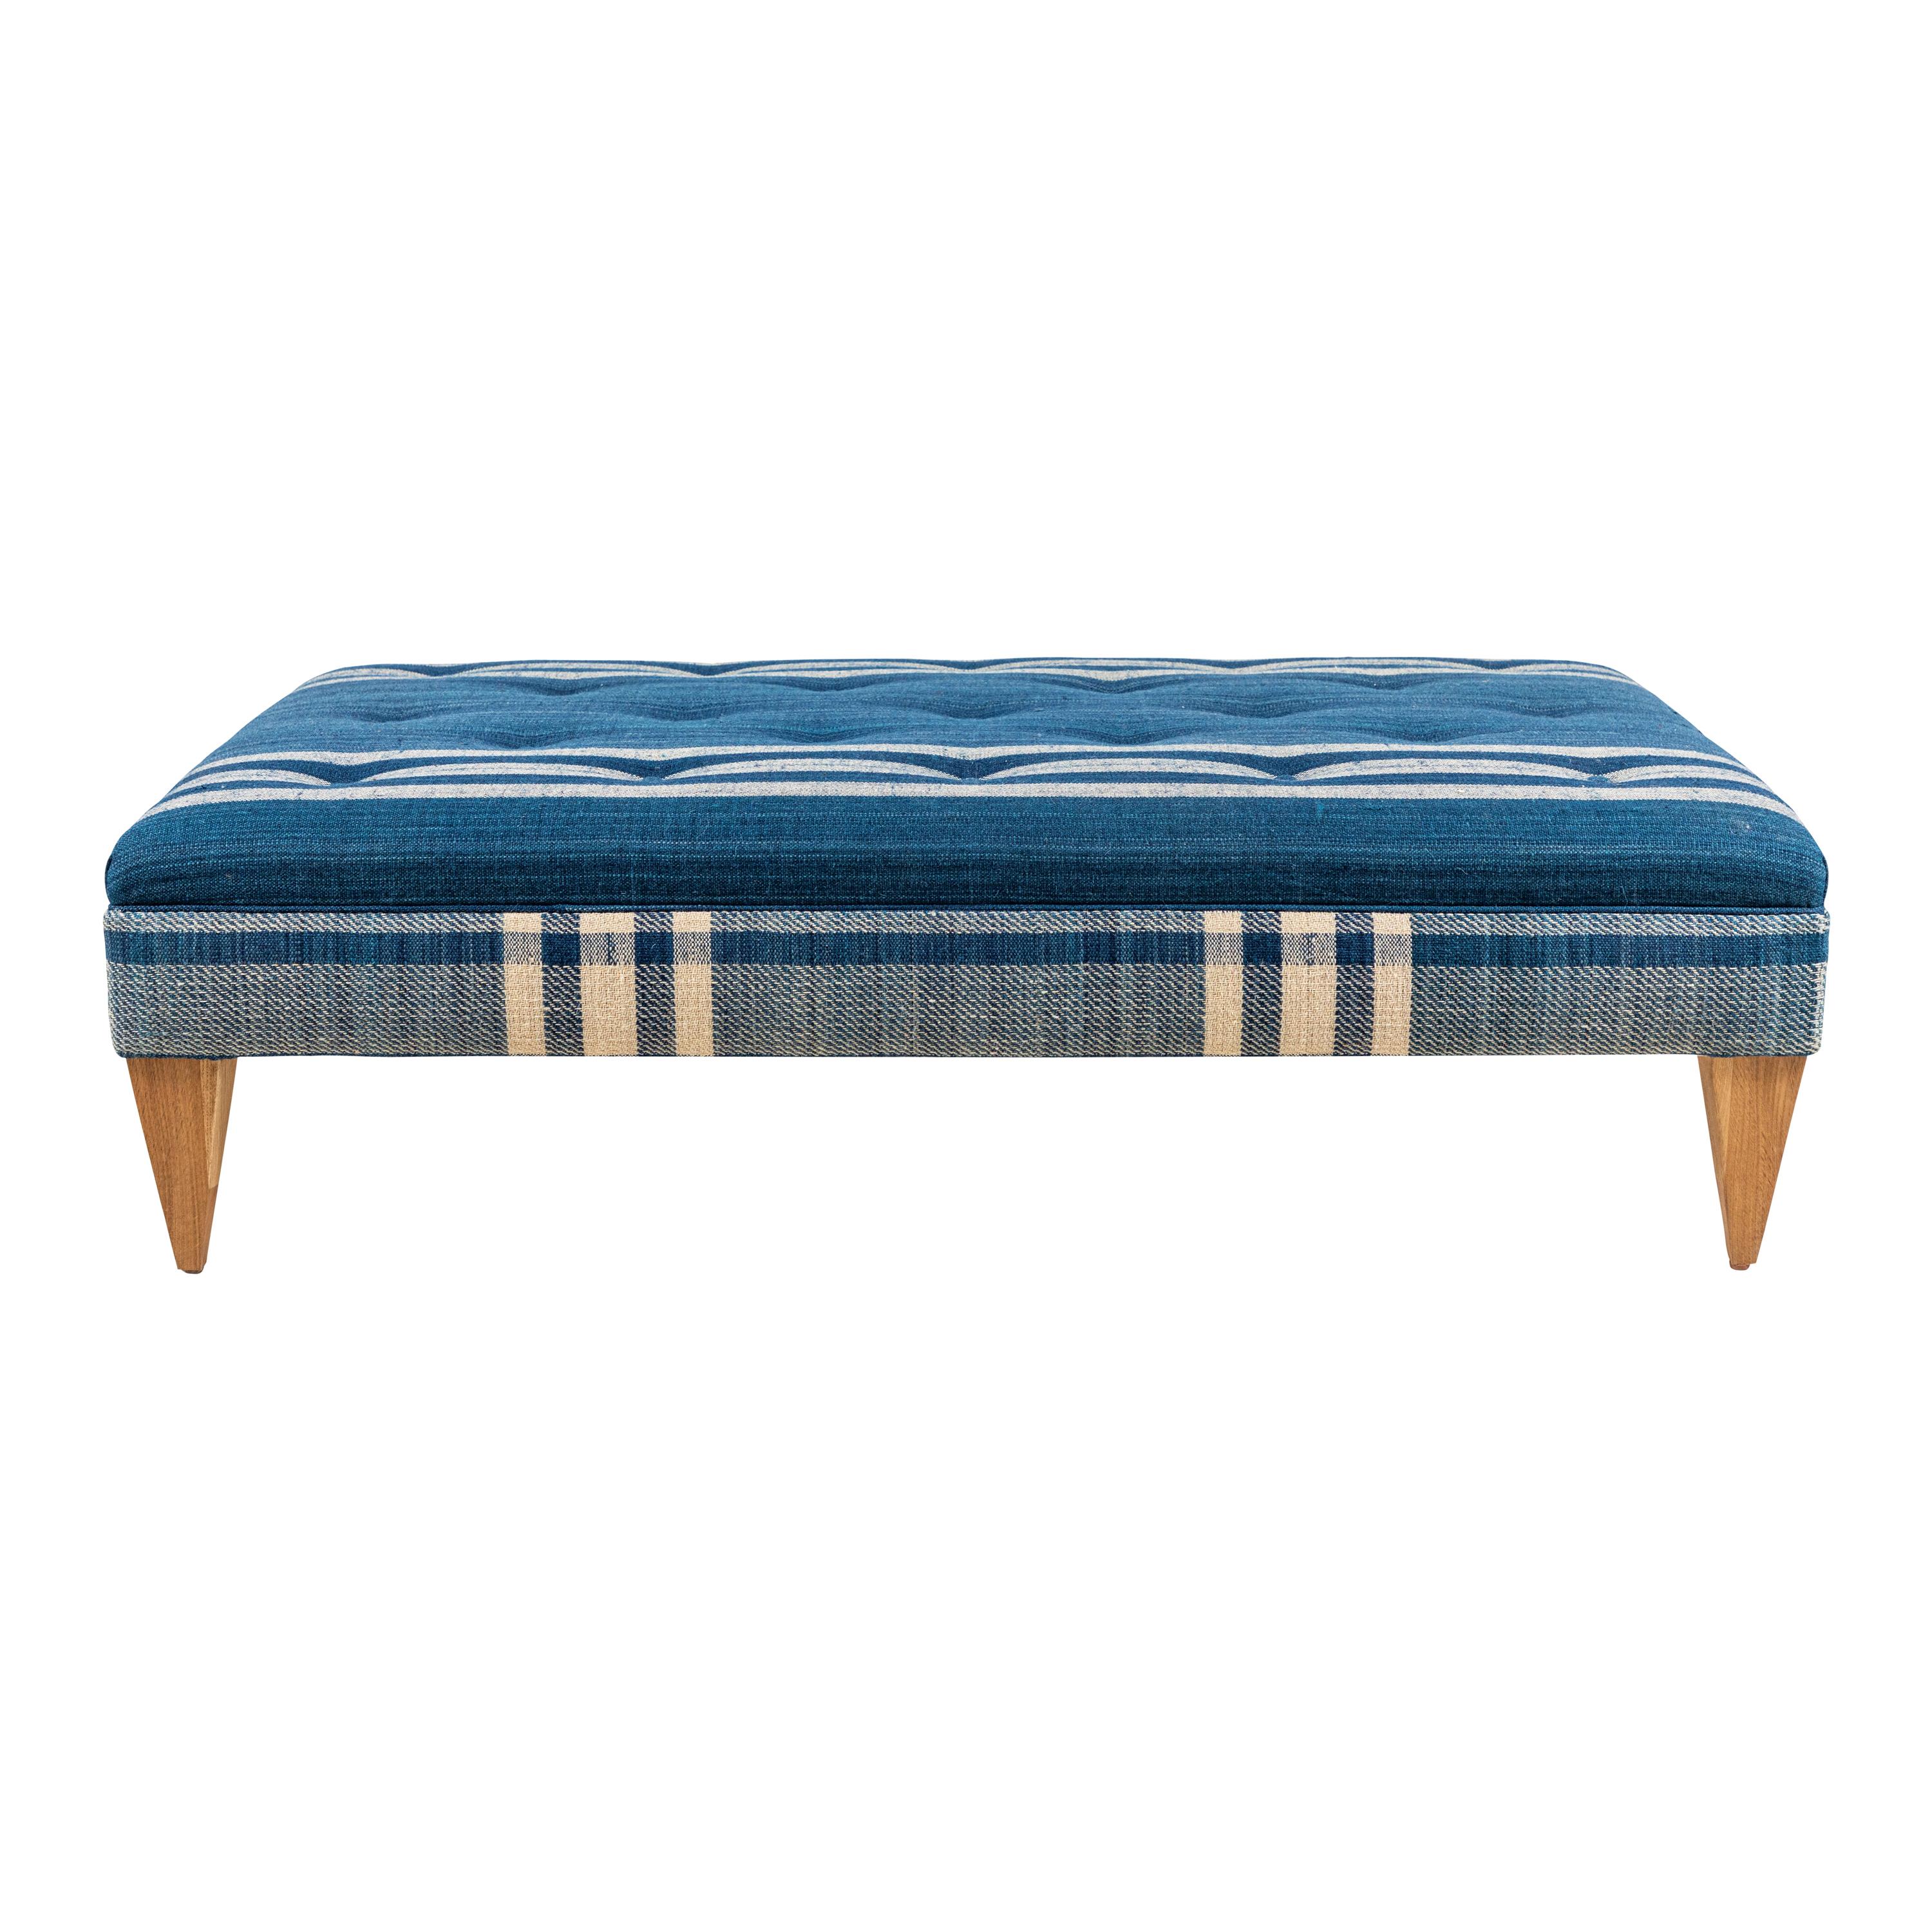 Nickey Kehoe Collection Tufted Ottoman